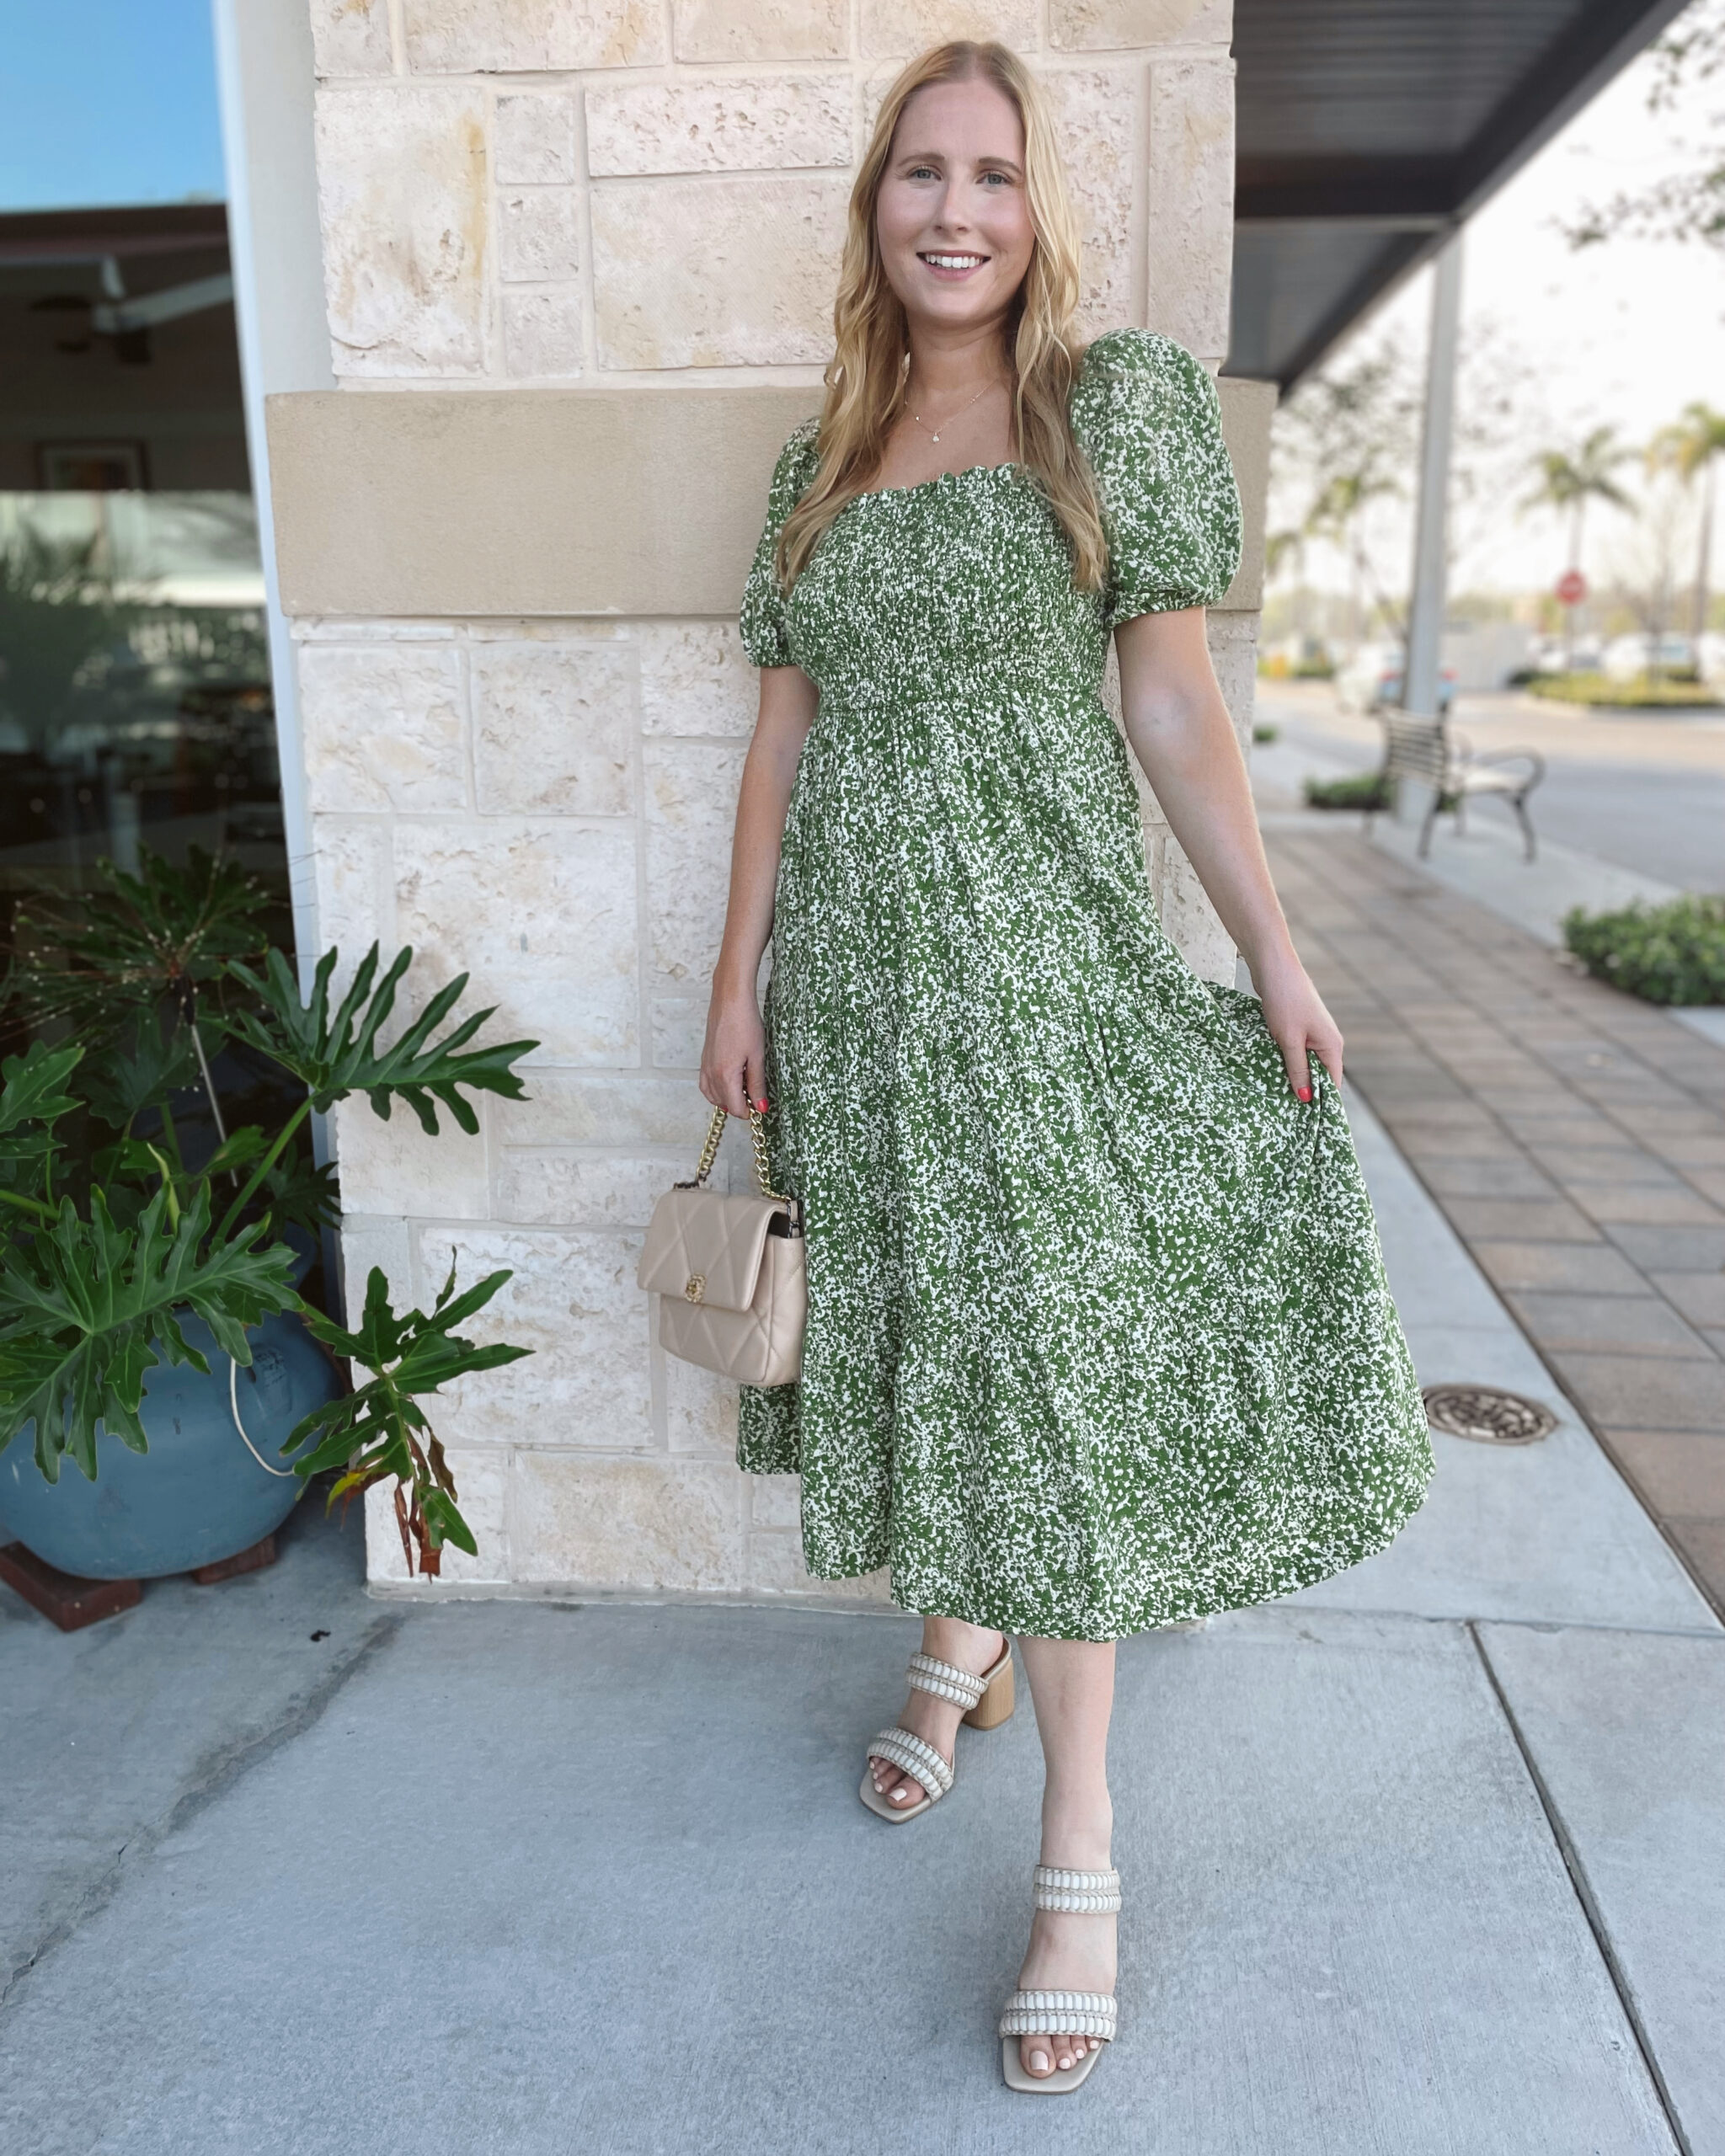 Abercrombie and Fitch Spring Dresses - Affordable by Amanda